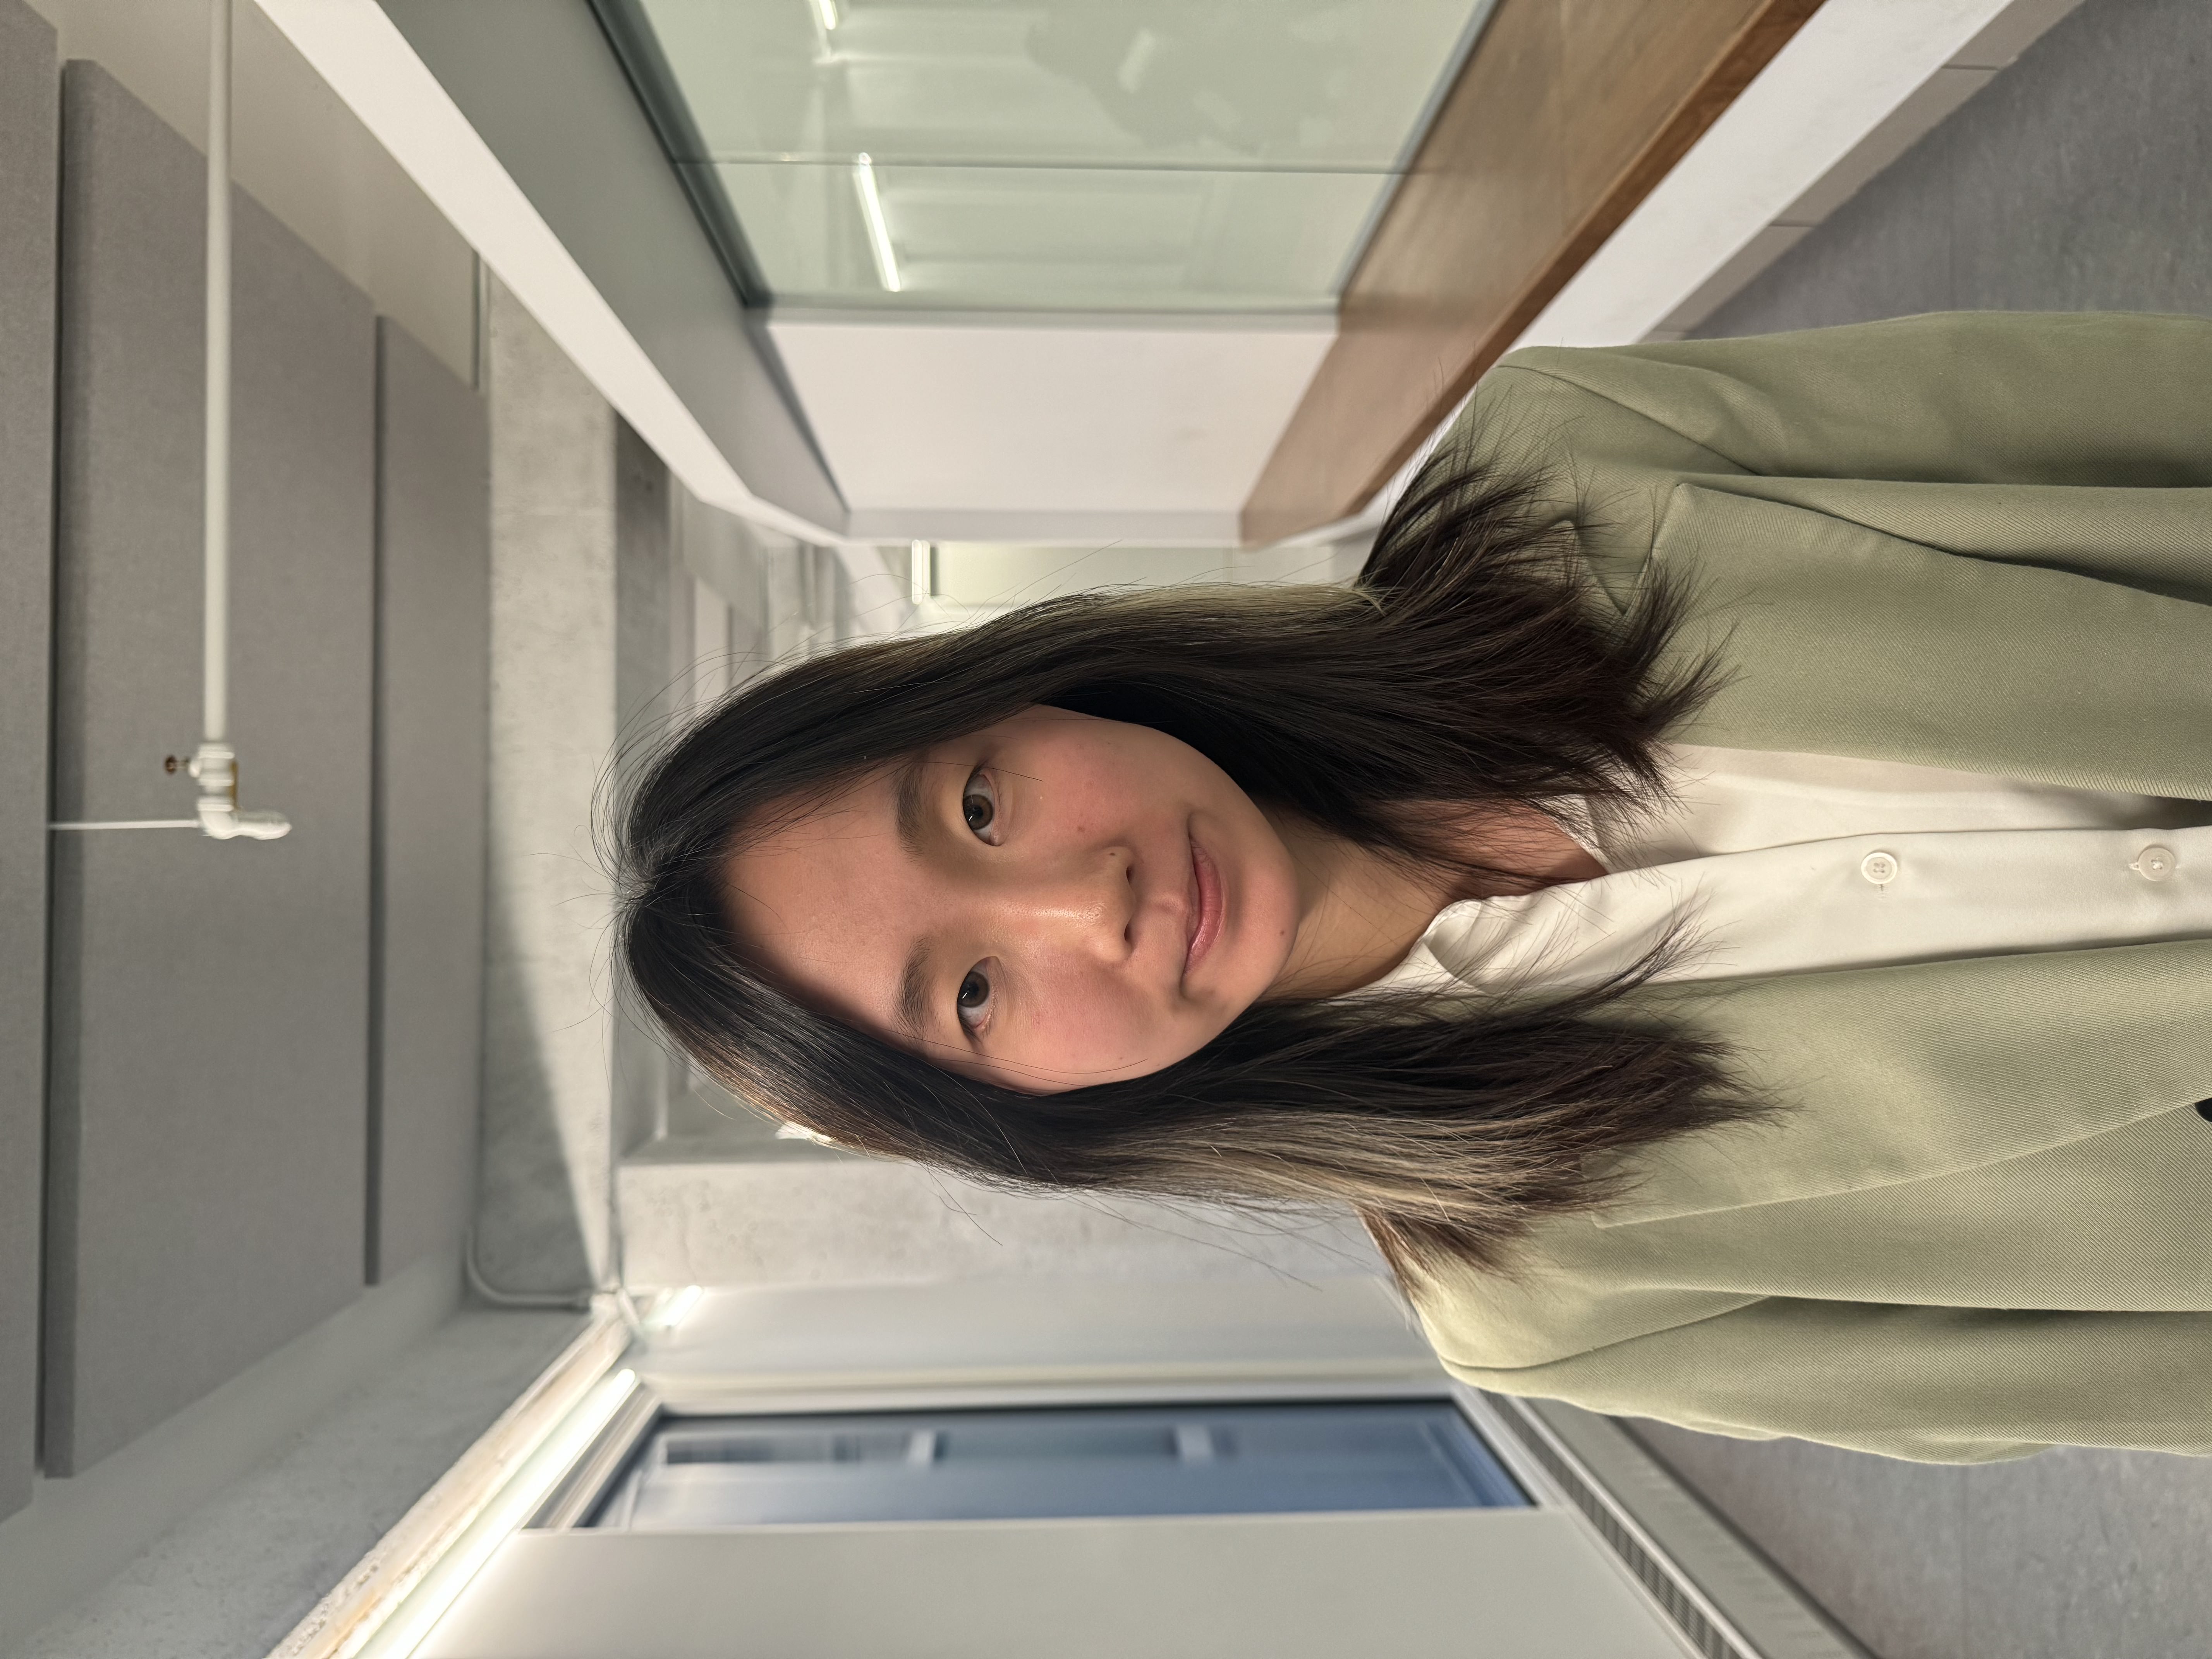 Meet Gloria Zhang! Freshman studying Biomedical Engineering, with interdisciplinary interests. 
                Enjoys exploring the world through traveling, reading, seeking adventure in activities like rock 
                climbing and snowboarding, and experimenting with new recipes and flavors in the kitchen.